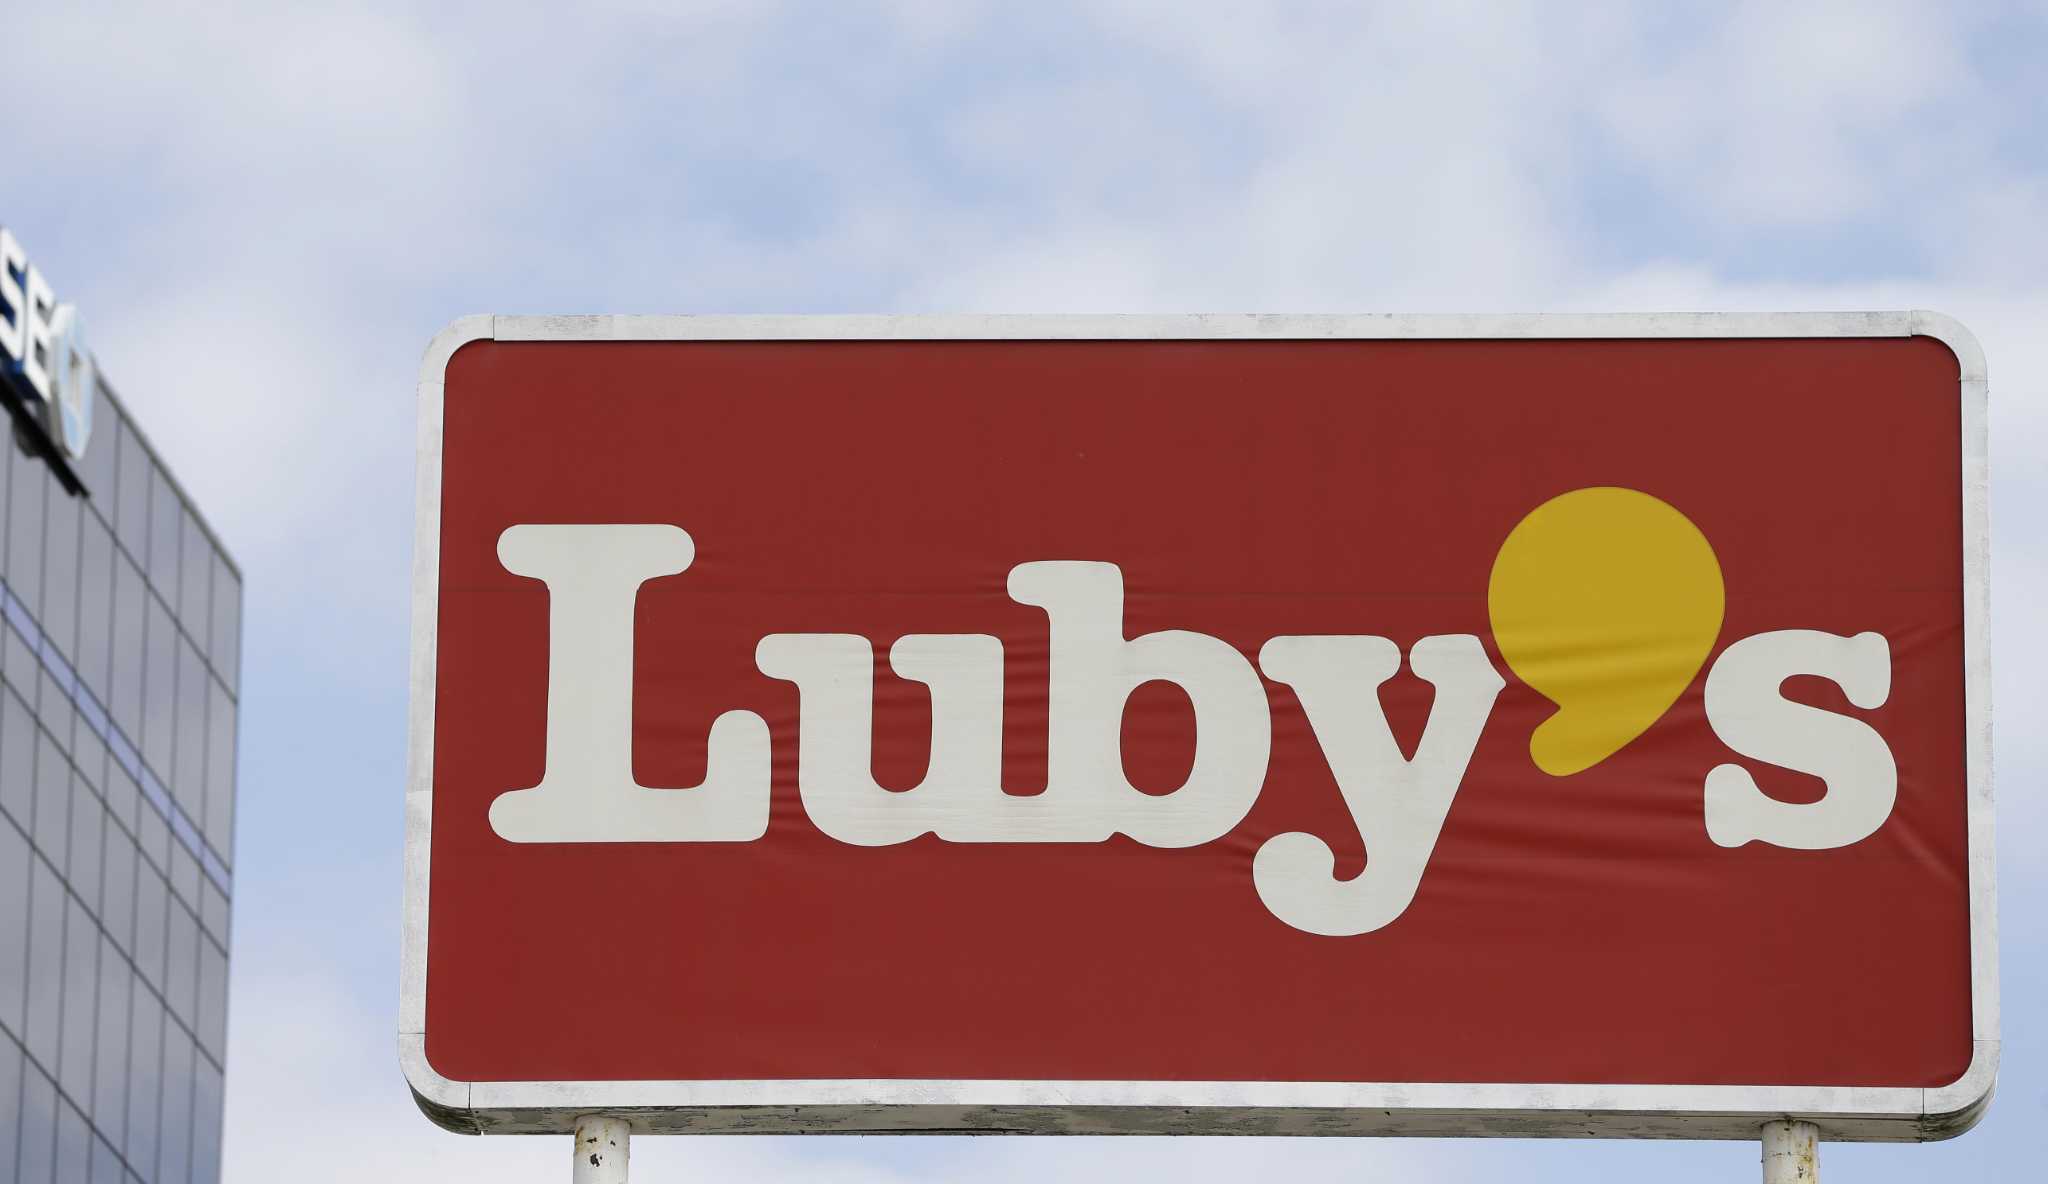 Luby’s closes restaurant sales, strikes new deal to sell real estate